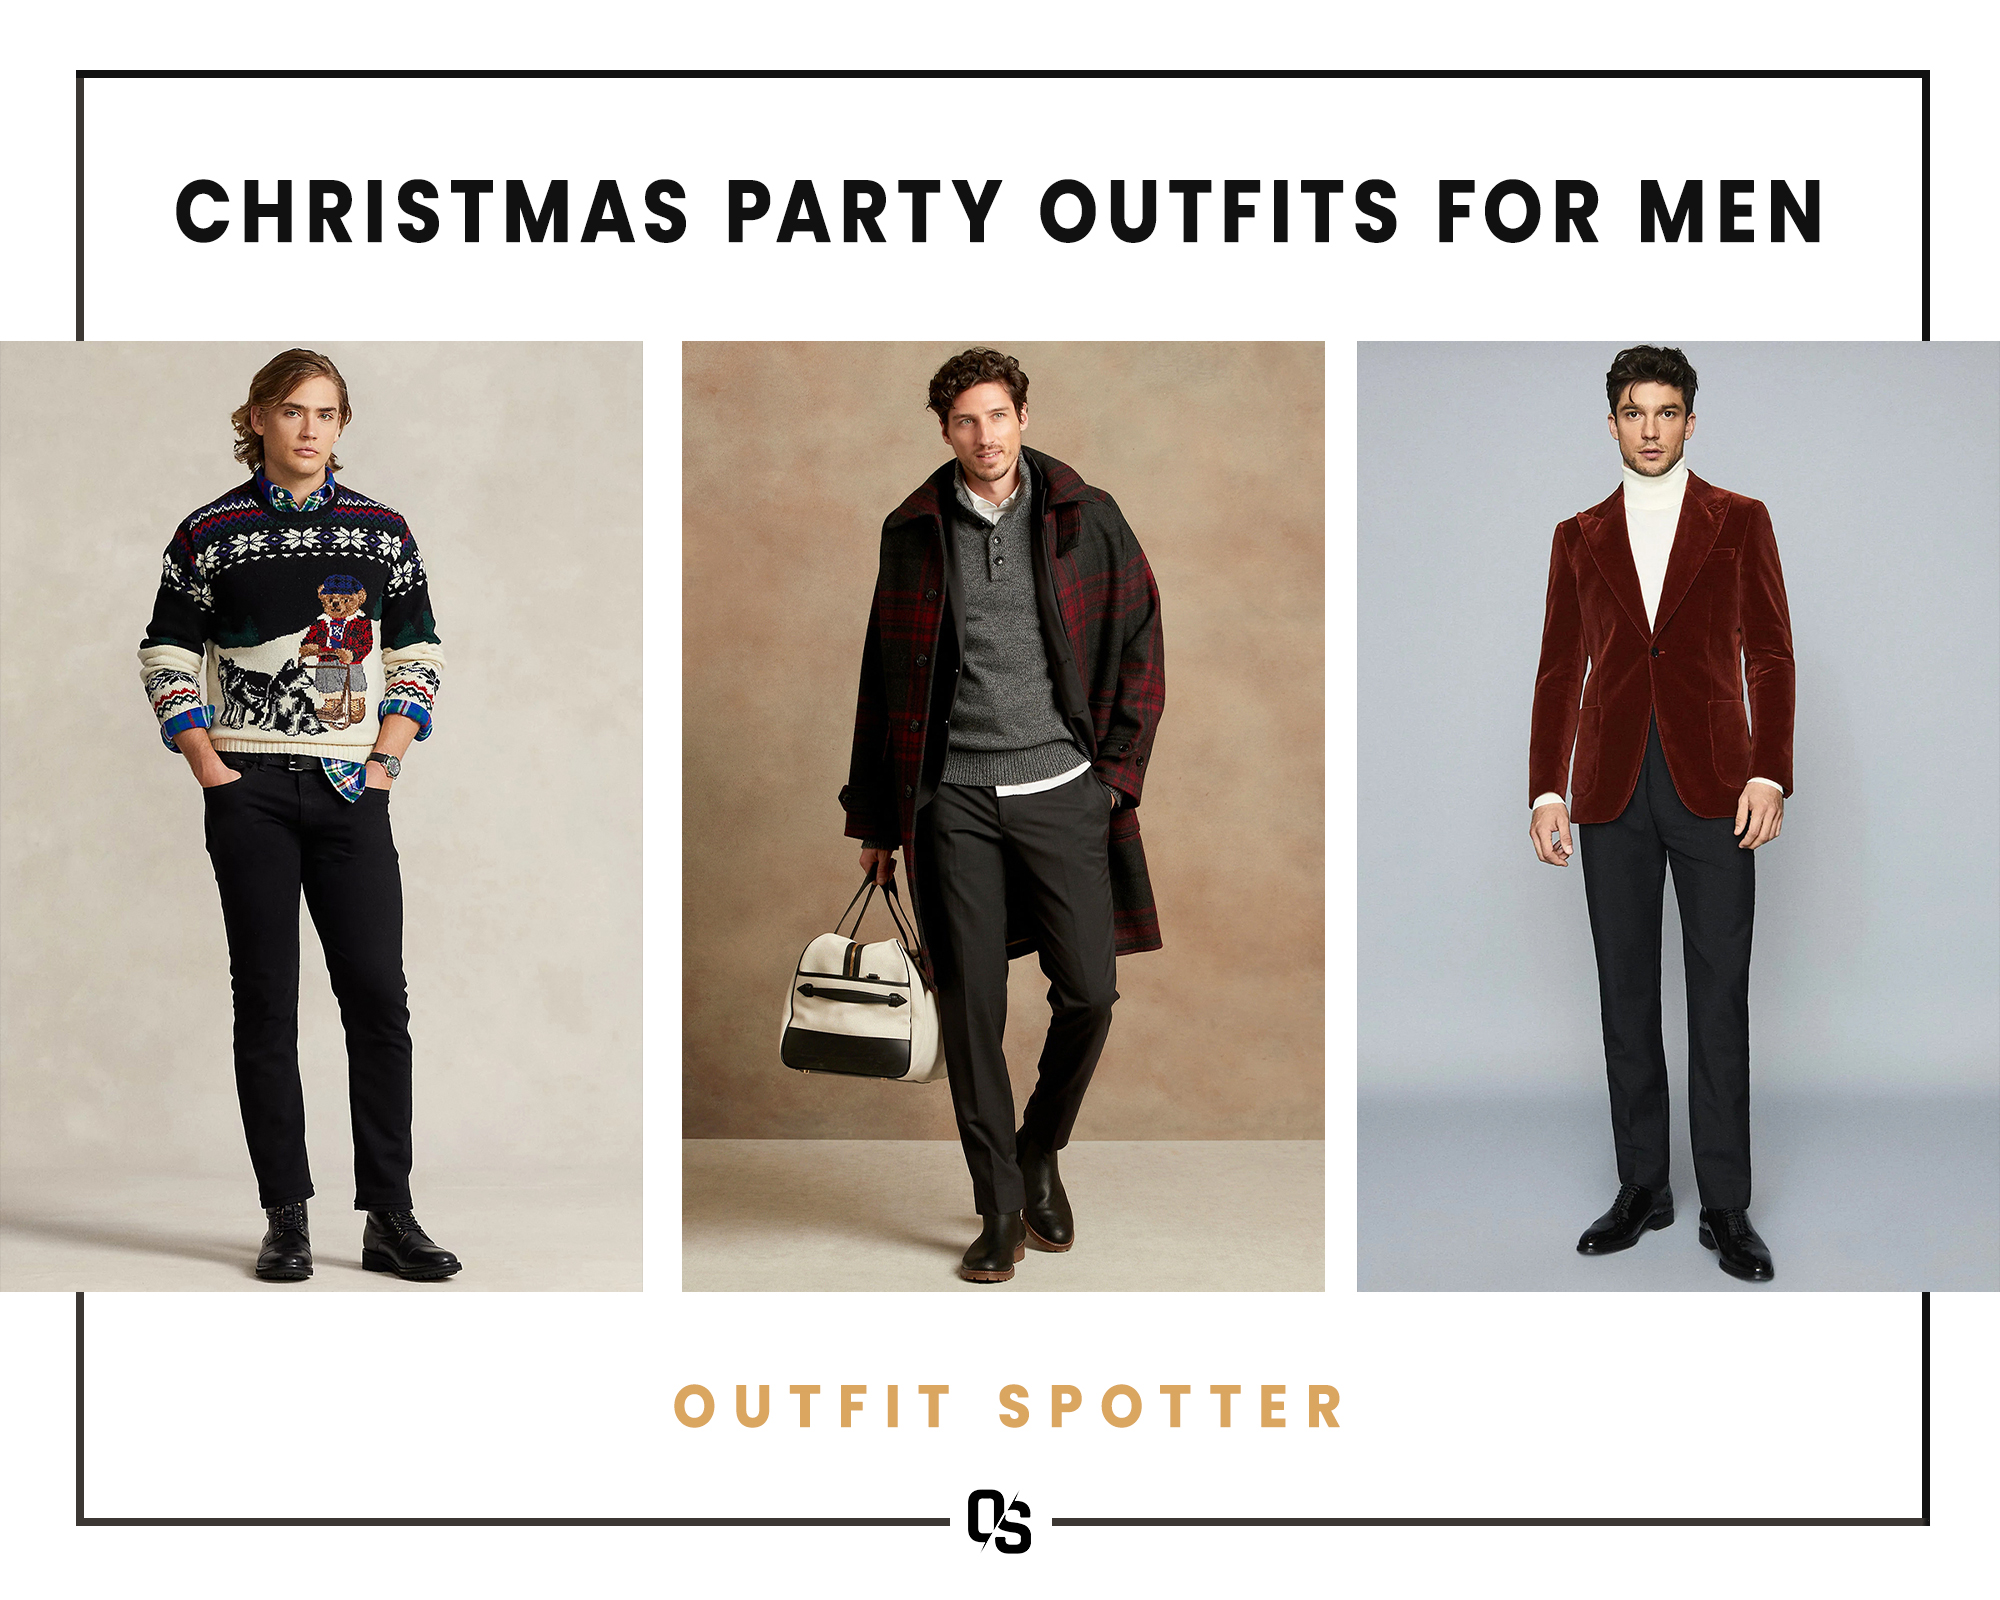 Different Christmas party outfits for men